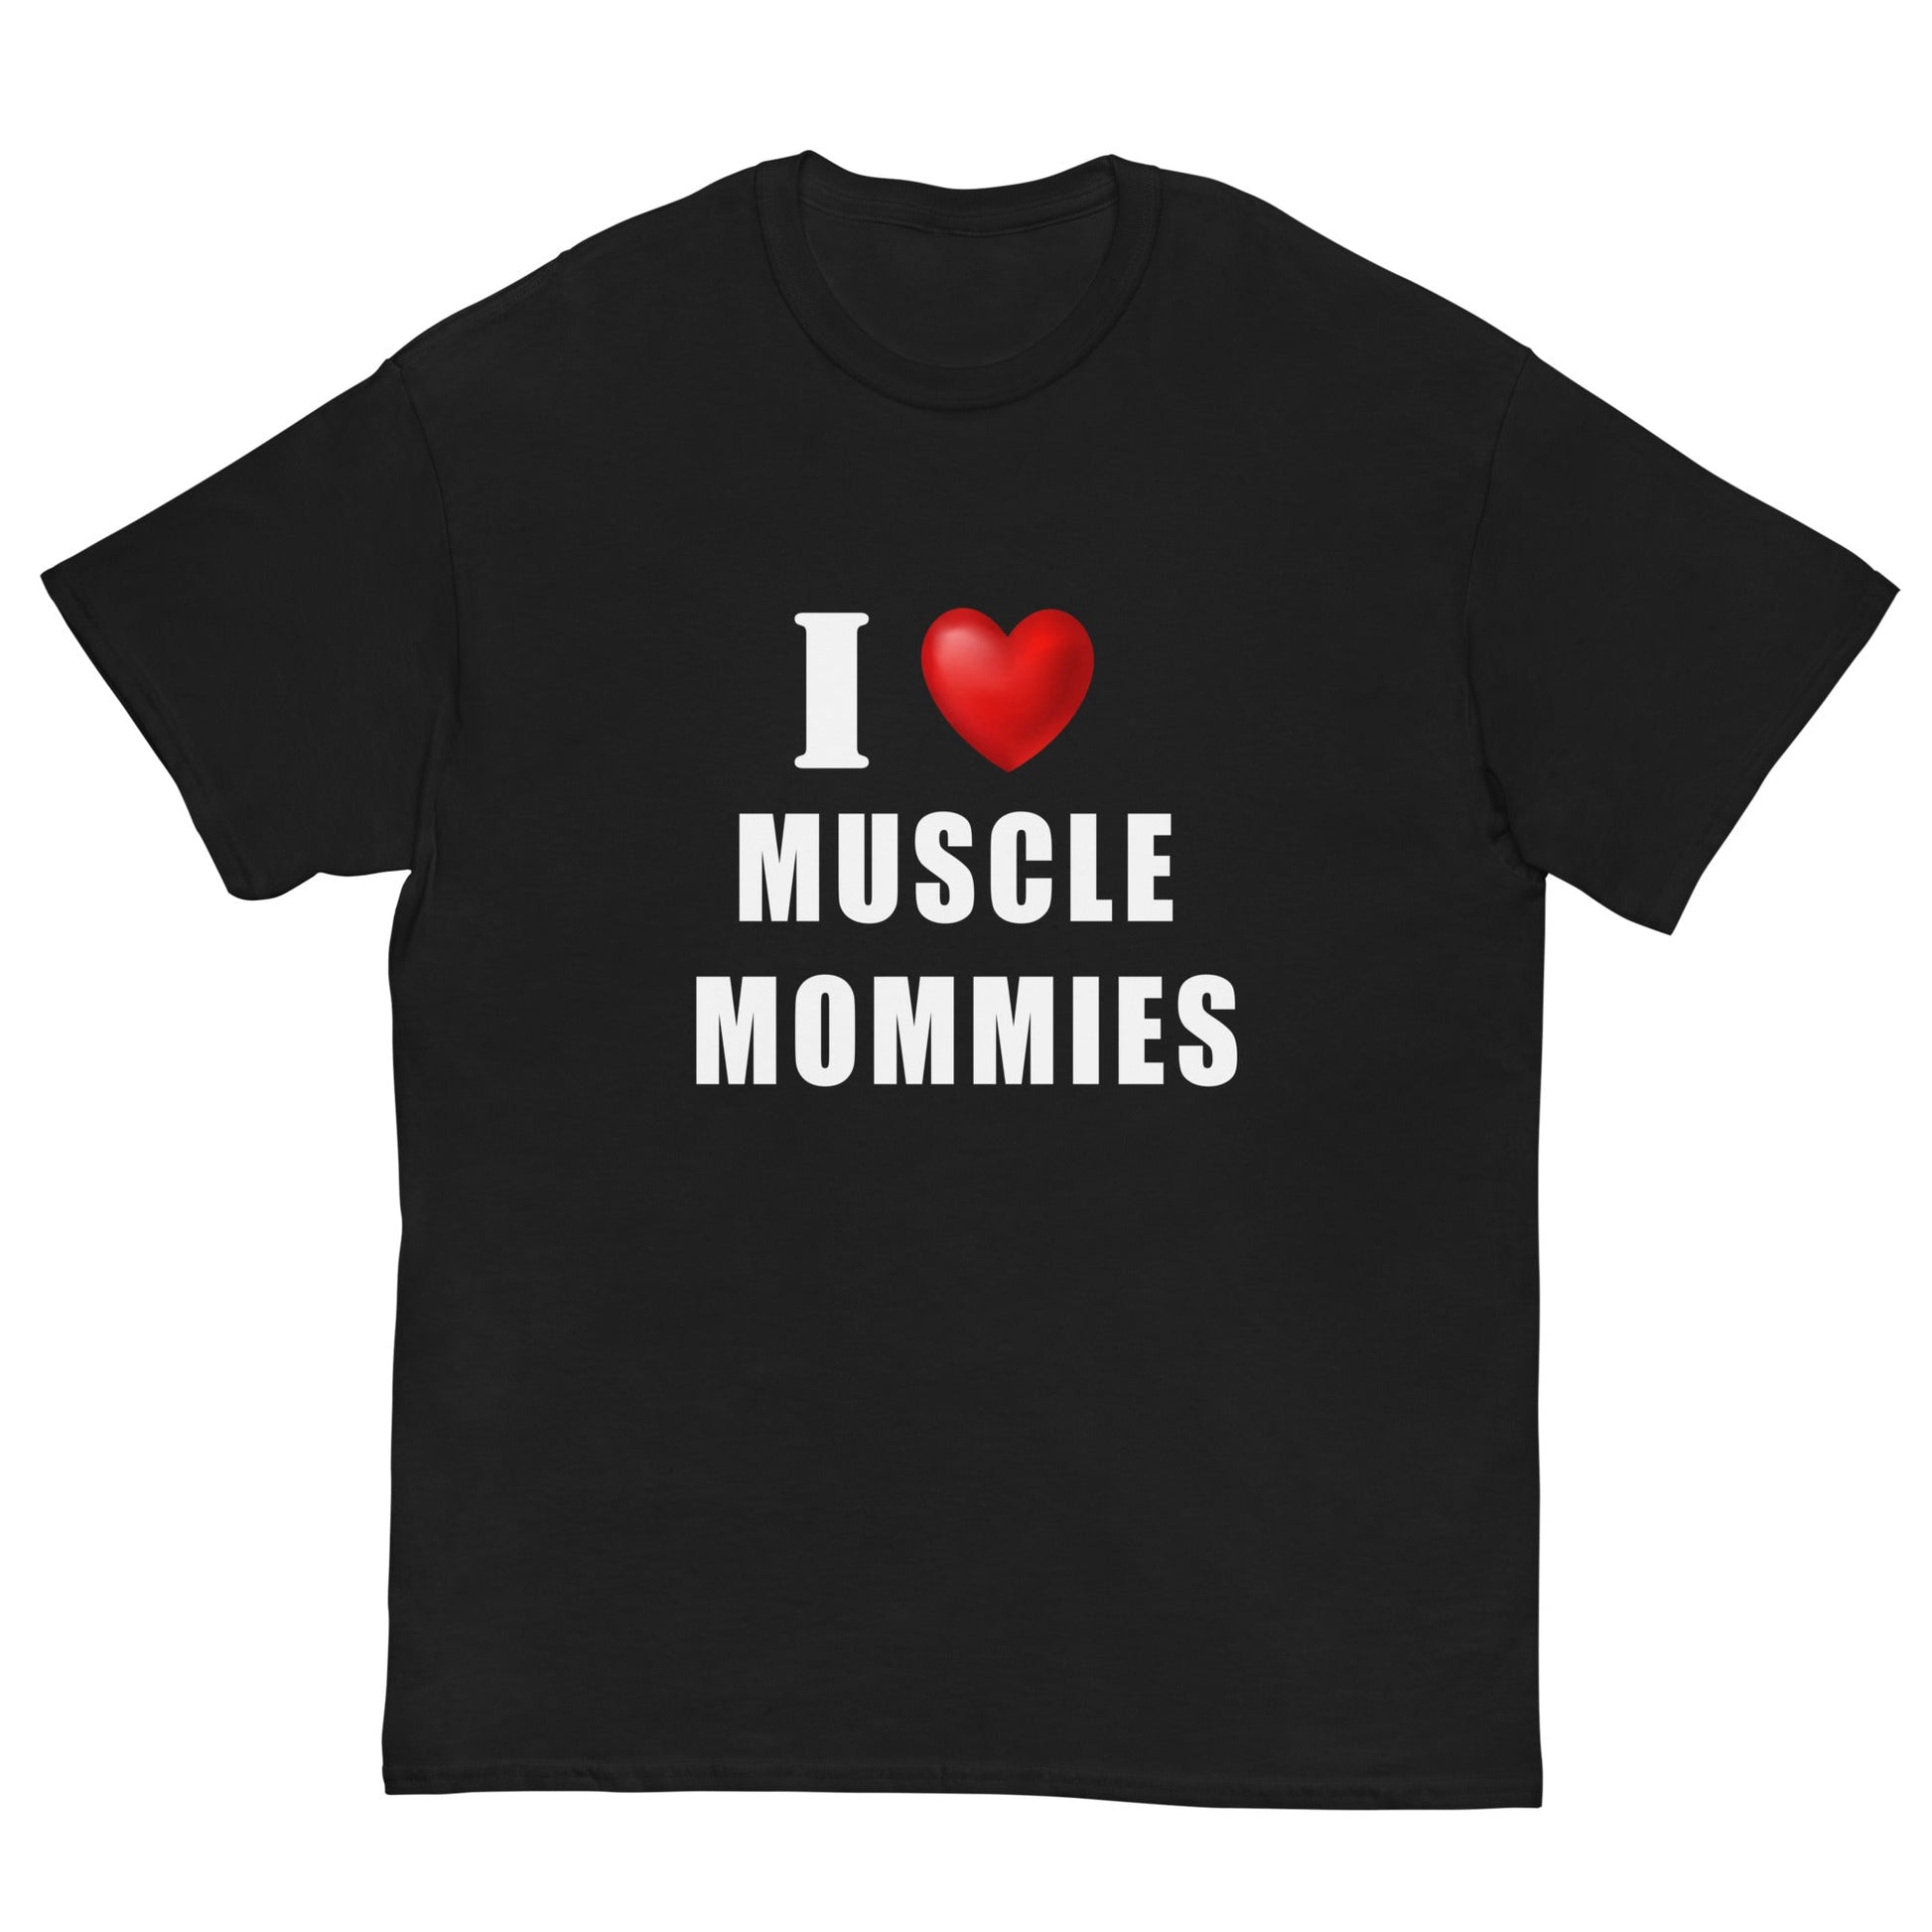 I LOVE MUSCLE MOMMIES - HardShirts